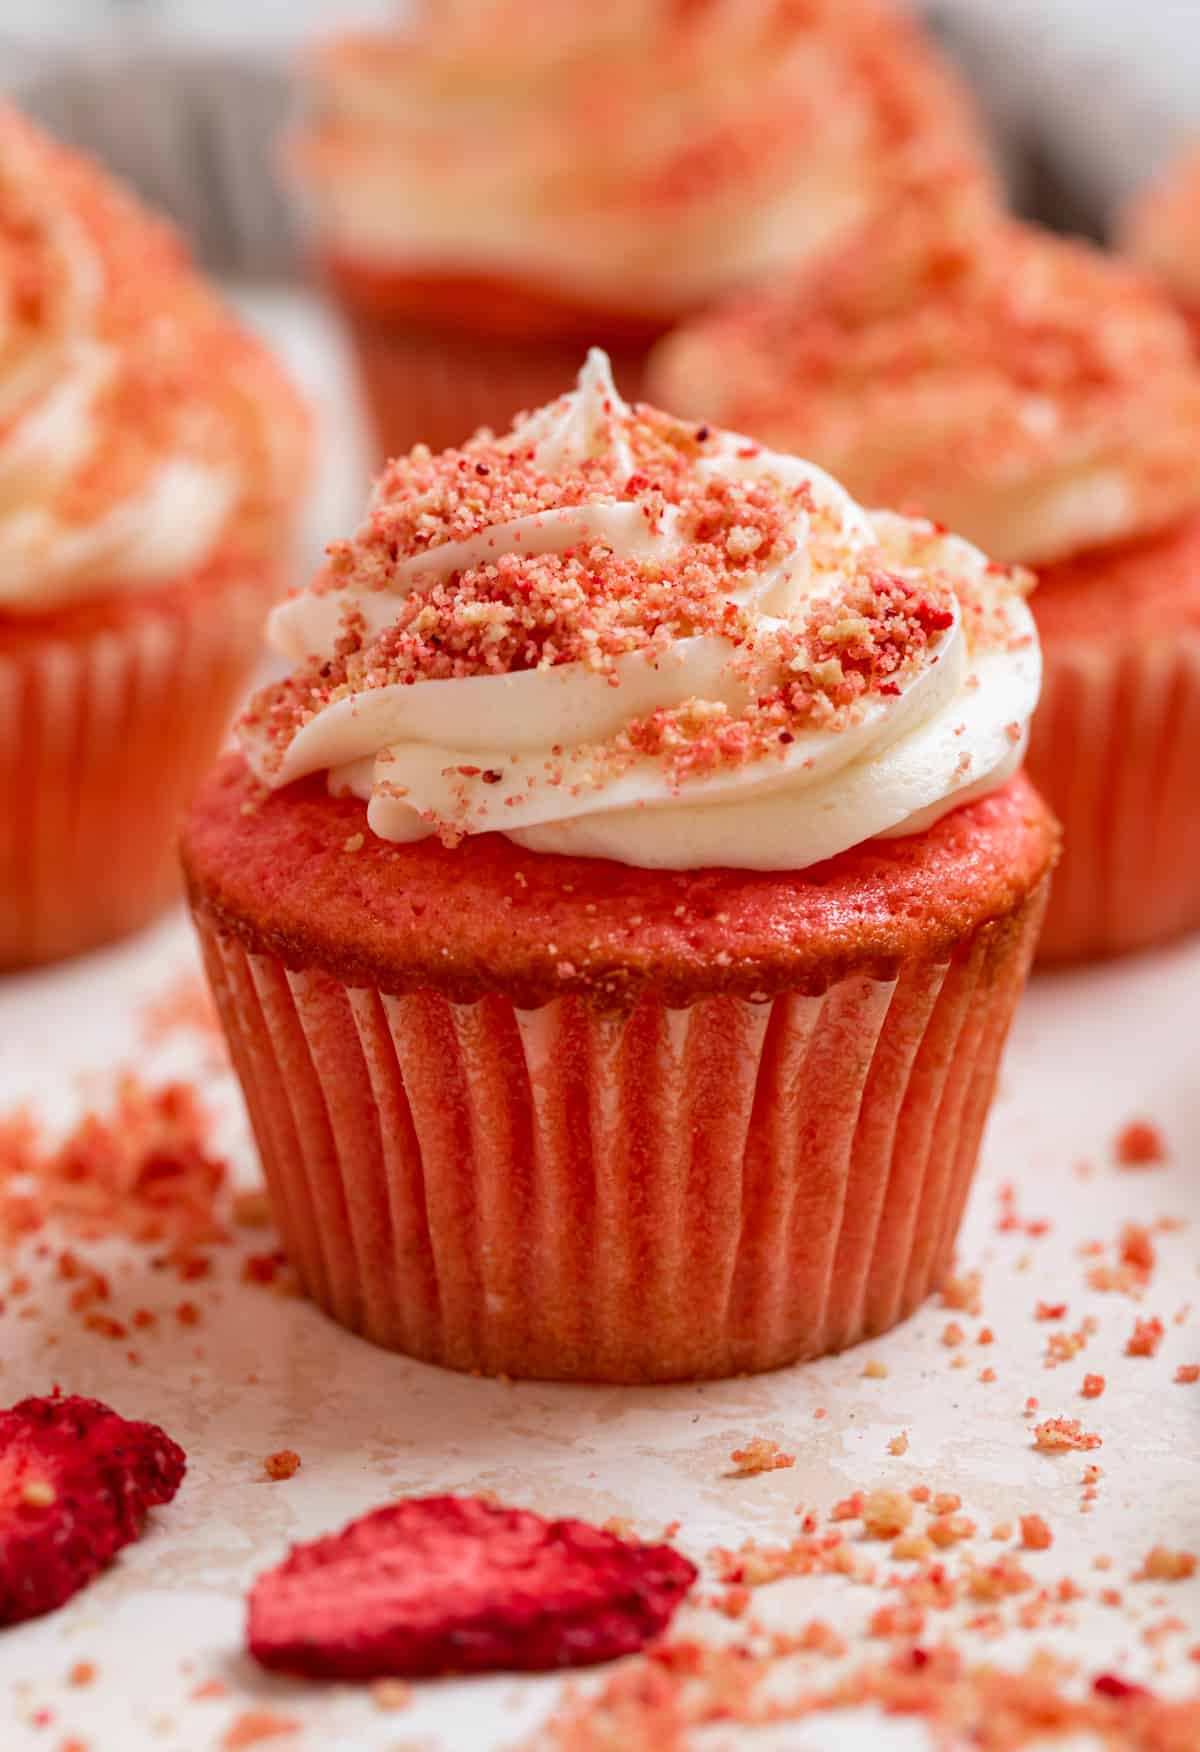 Strawberry cupcakes with buttercream frosting and strawberry crunch topping lined on counter with freeze dried strawberries and crumbs.